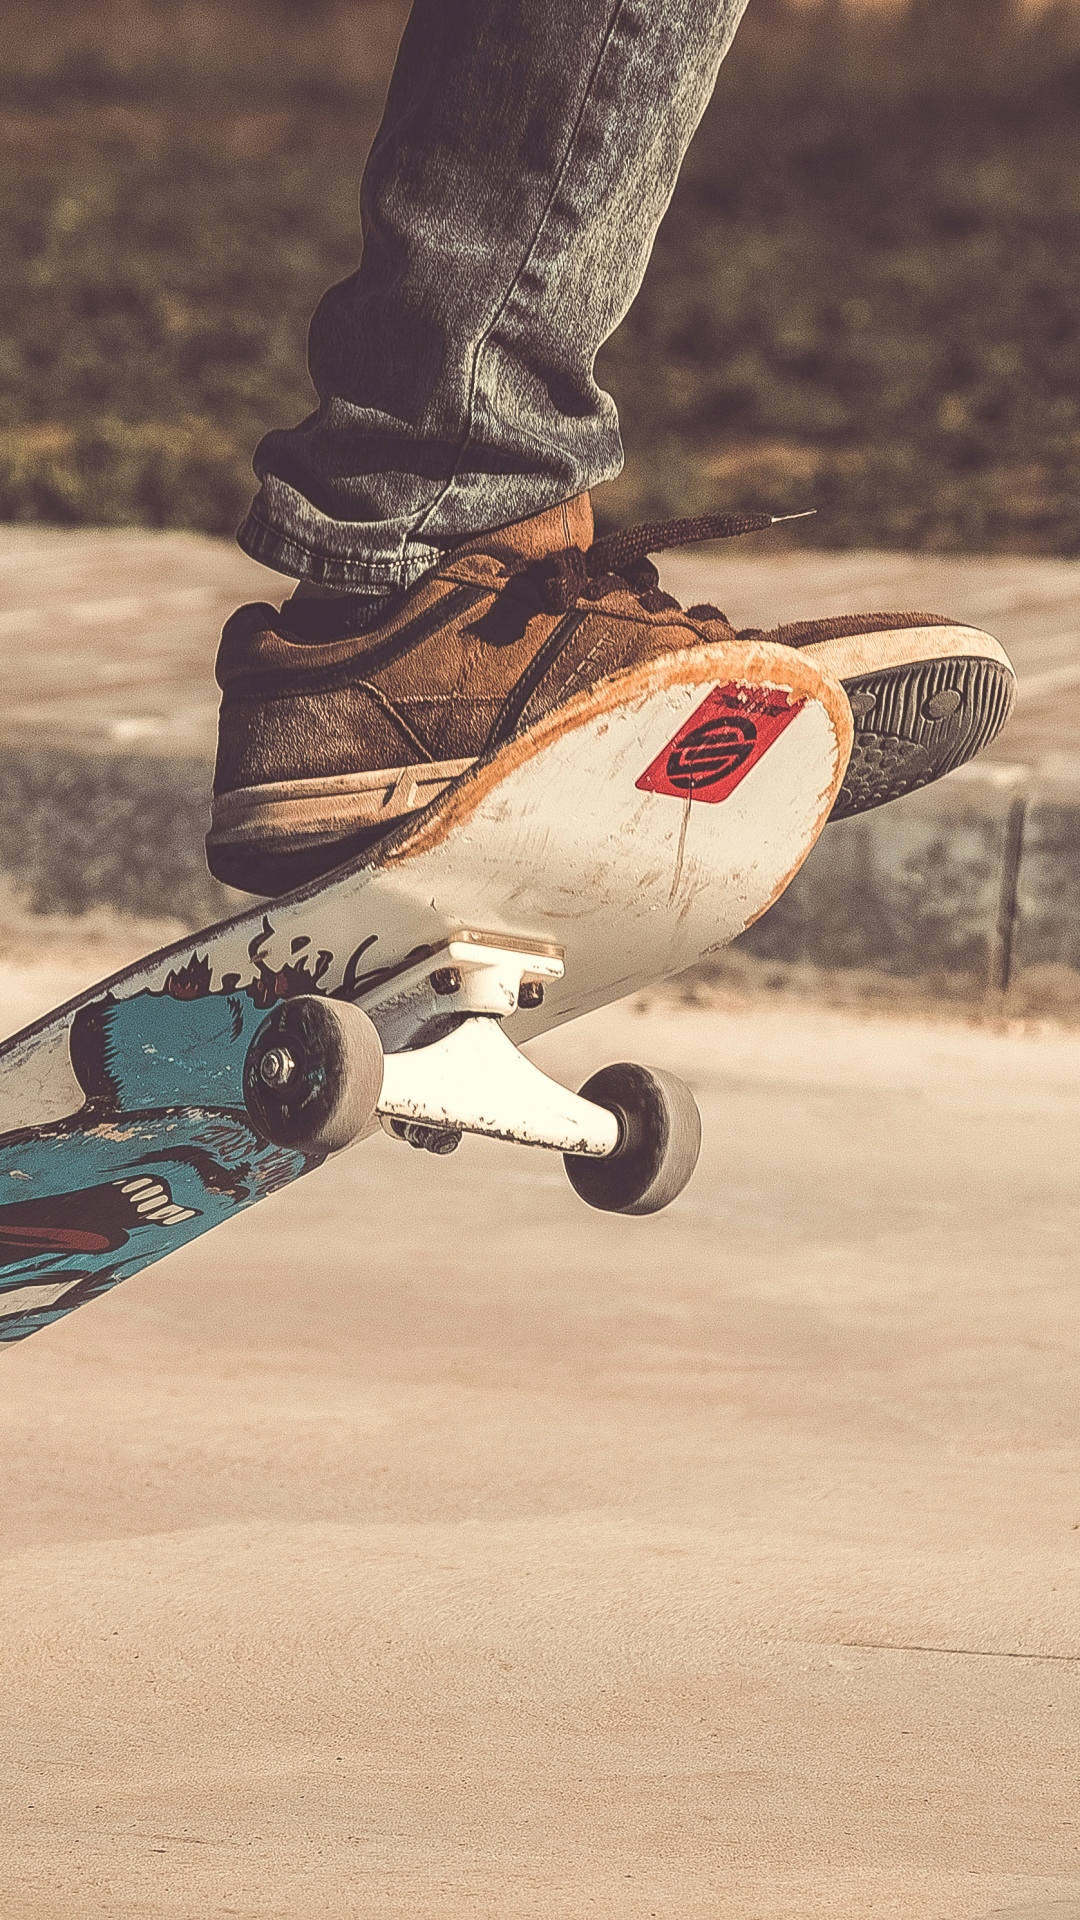 Skateboard Wallpaper For Iphone X, 8, 7, 6 Free Download - Skateboard Wallpaper For Iphone , HD Wallpaper & Backgrounds